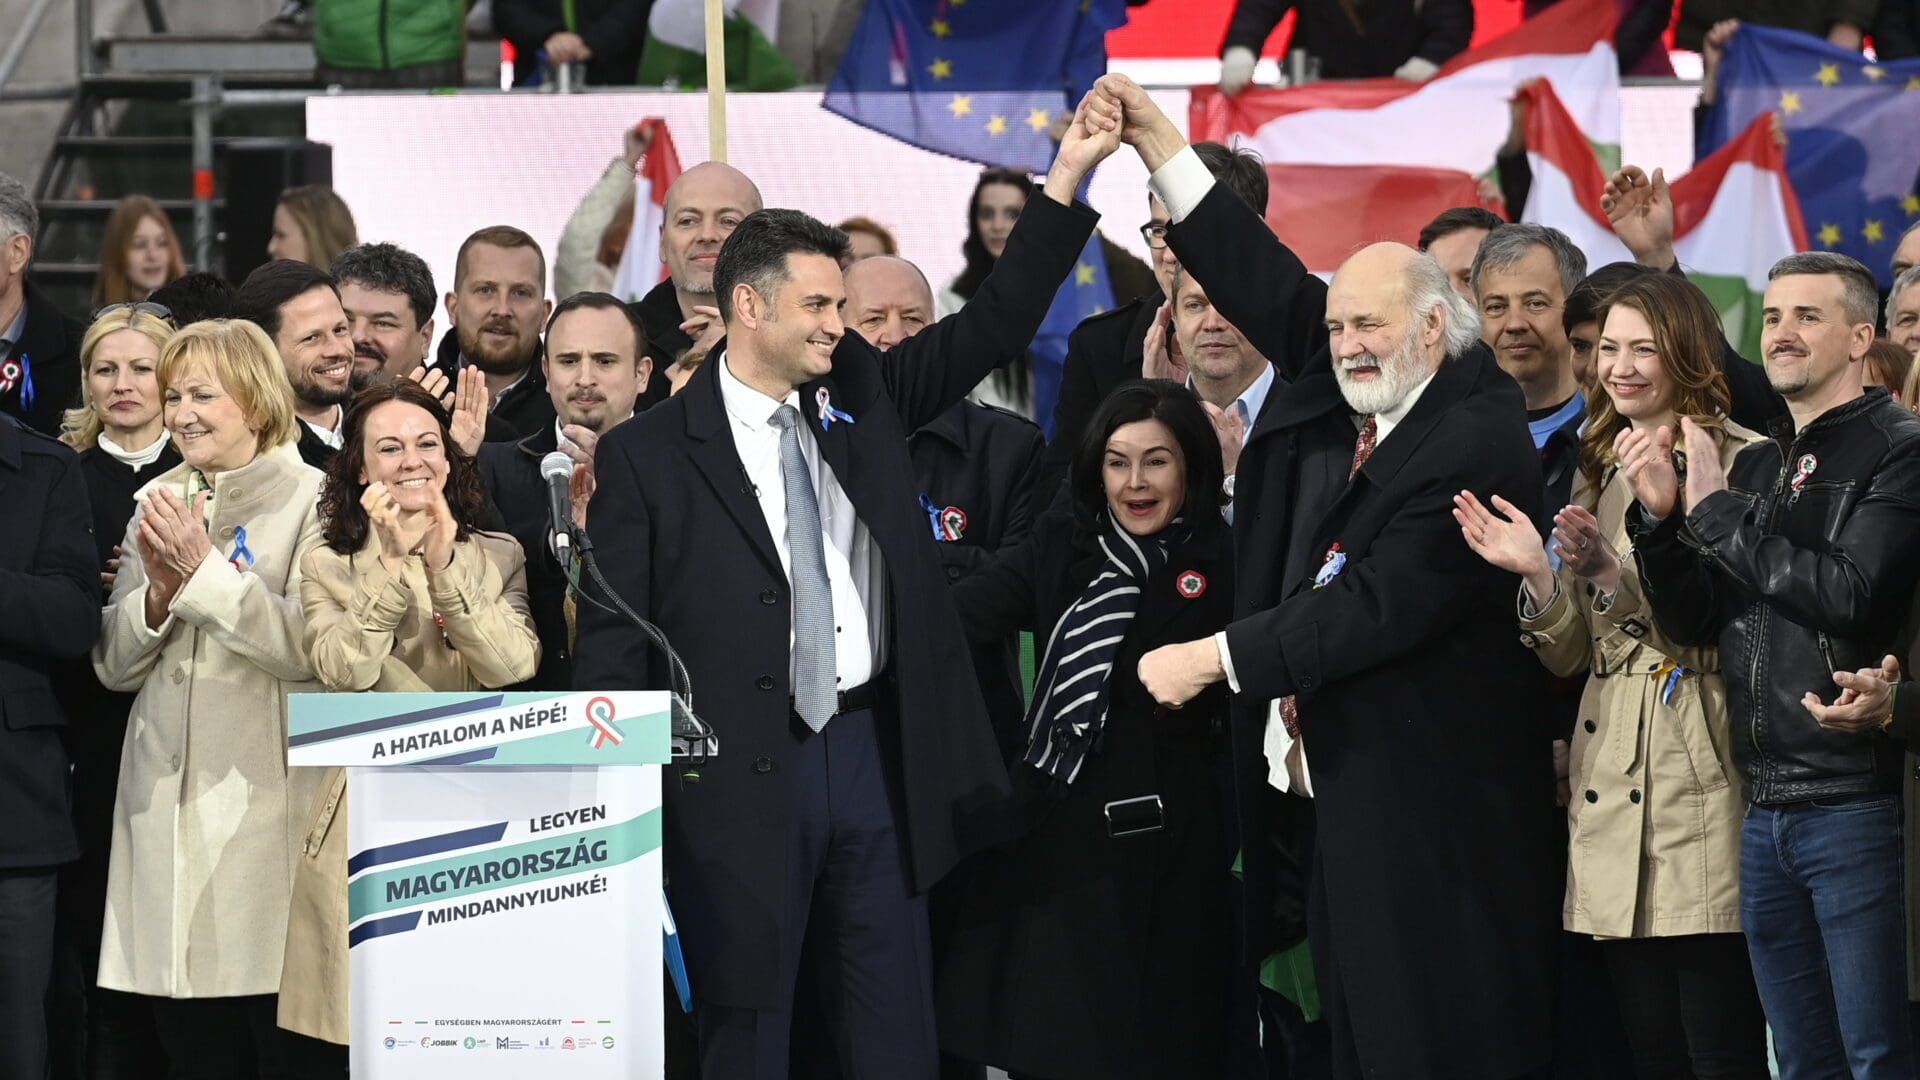 The opposition party leaders at their rally on 15 March 2022.